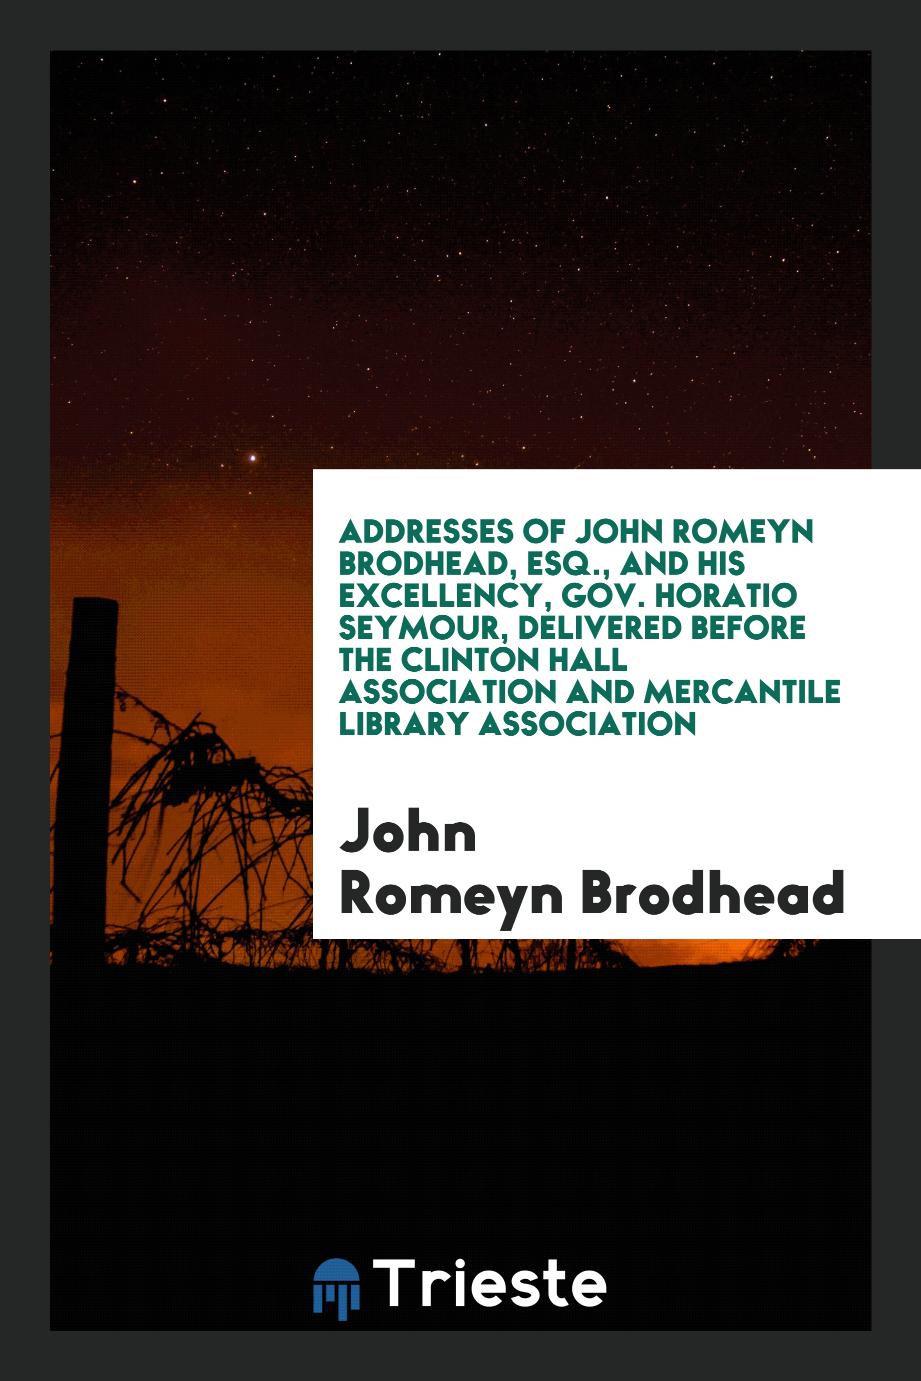 Addresses of John Romeyn Brodhead, Esq., and His Excellency, Gov. Horatio Seymour, Delivered before the Clinton hall association and mercantile library association